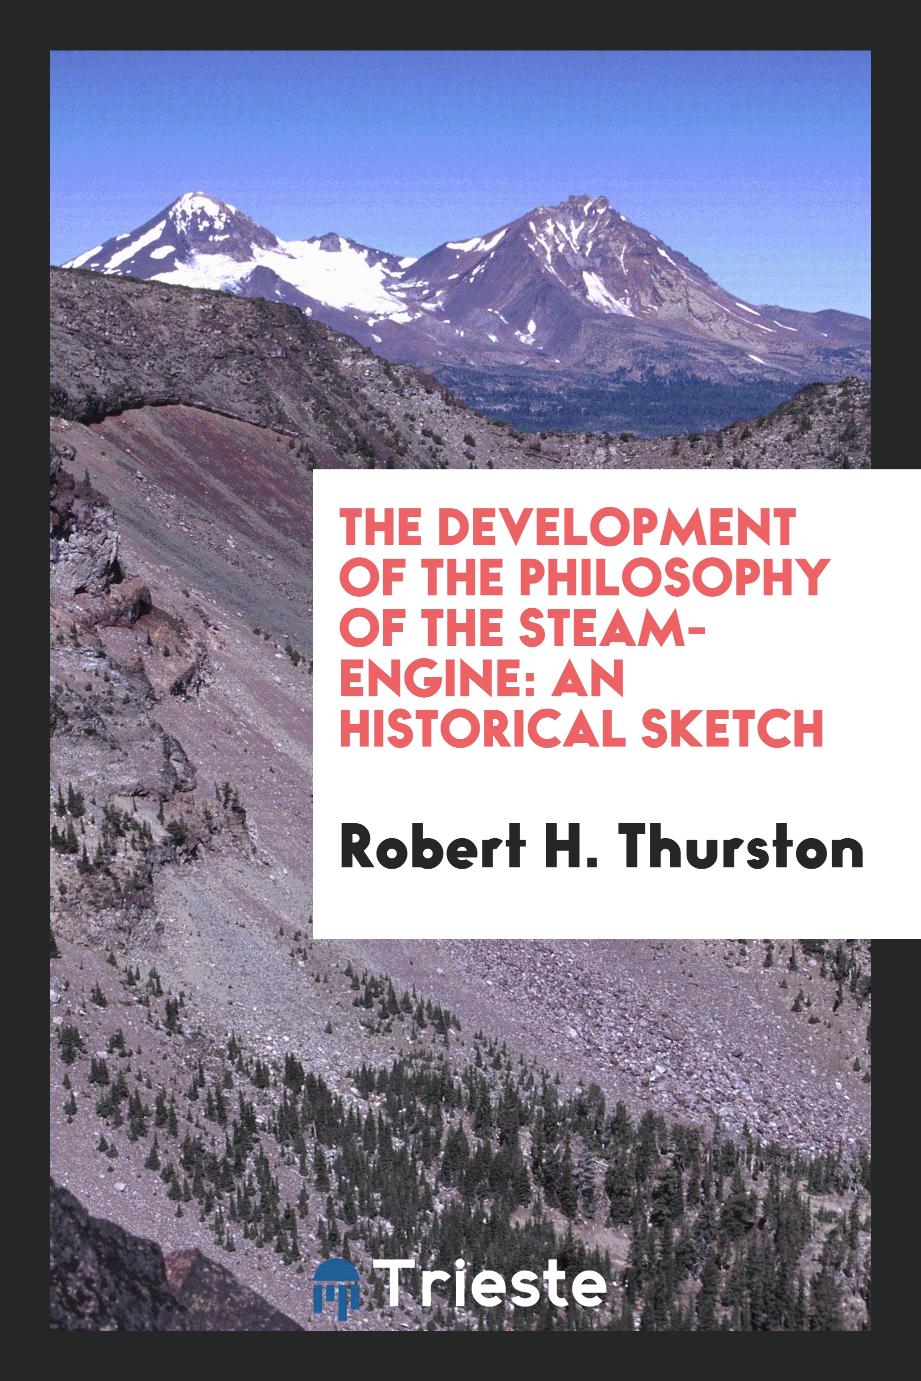 The Development of the Philosophy of the Steam-engine: An Historical Sketch